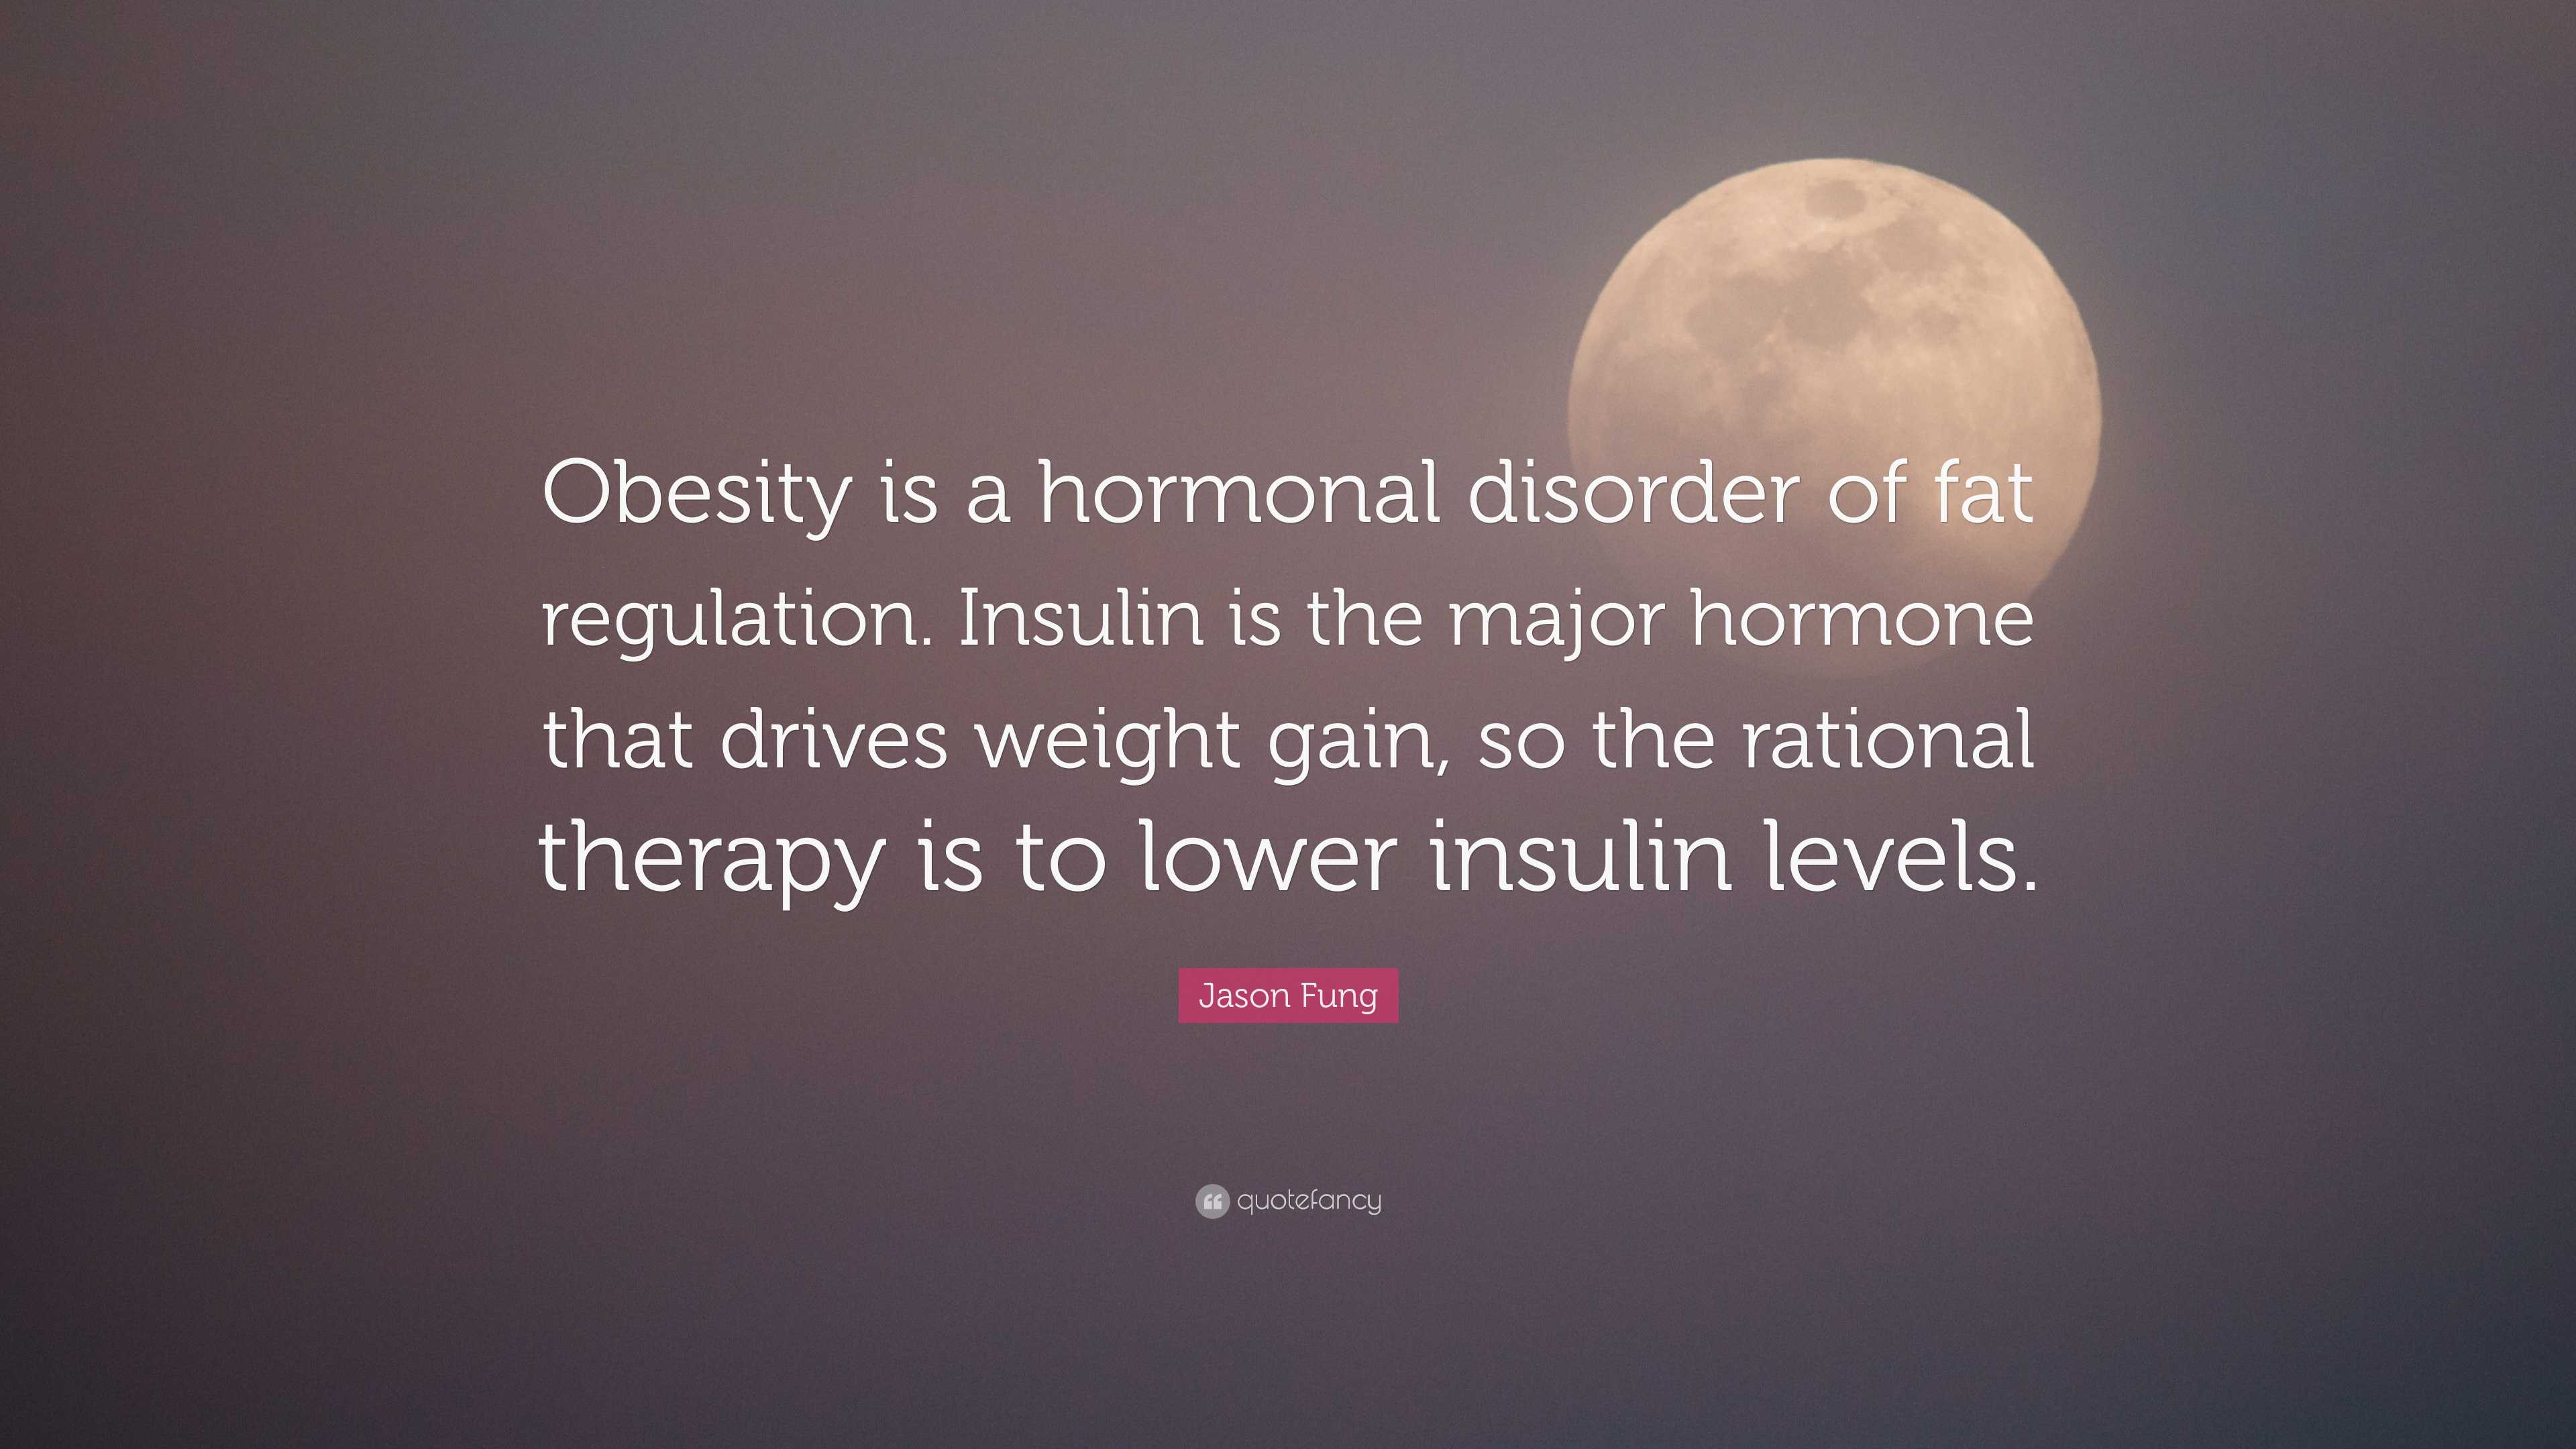 Dr. Jason Fung: To Lose Weight, You MUST control Insulin 